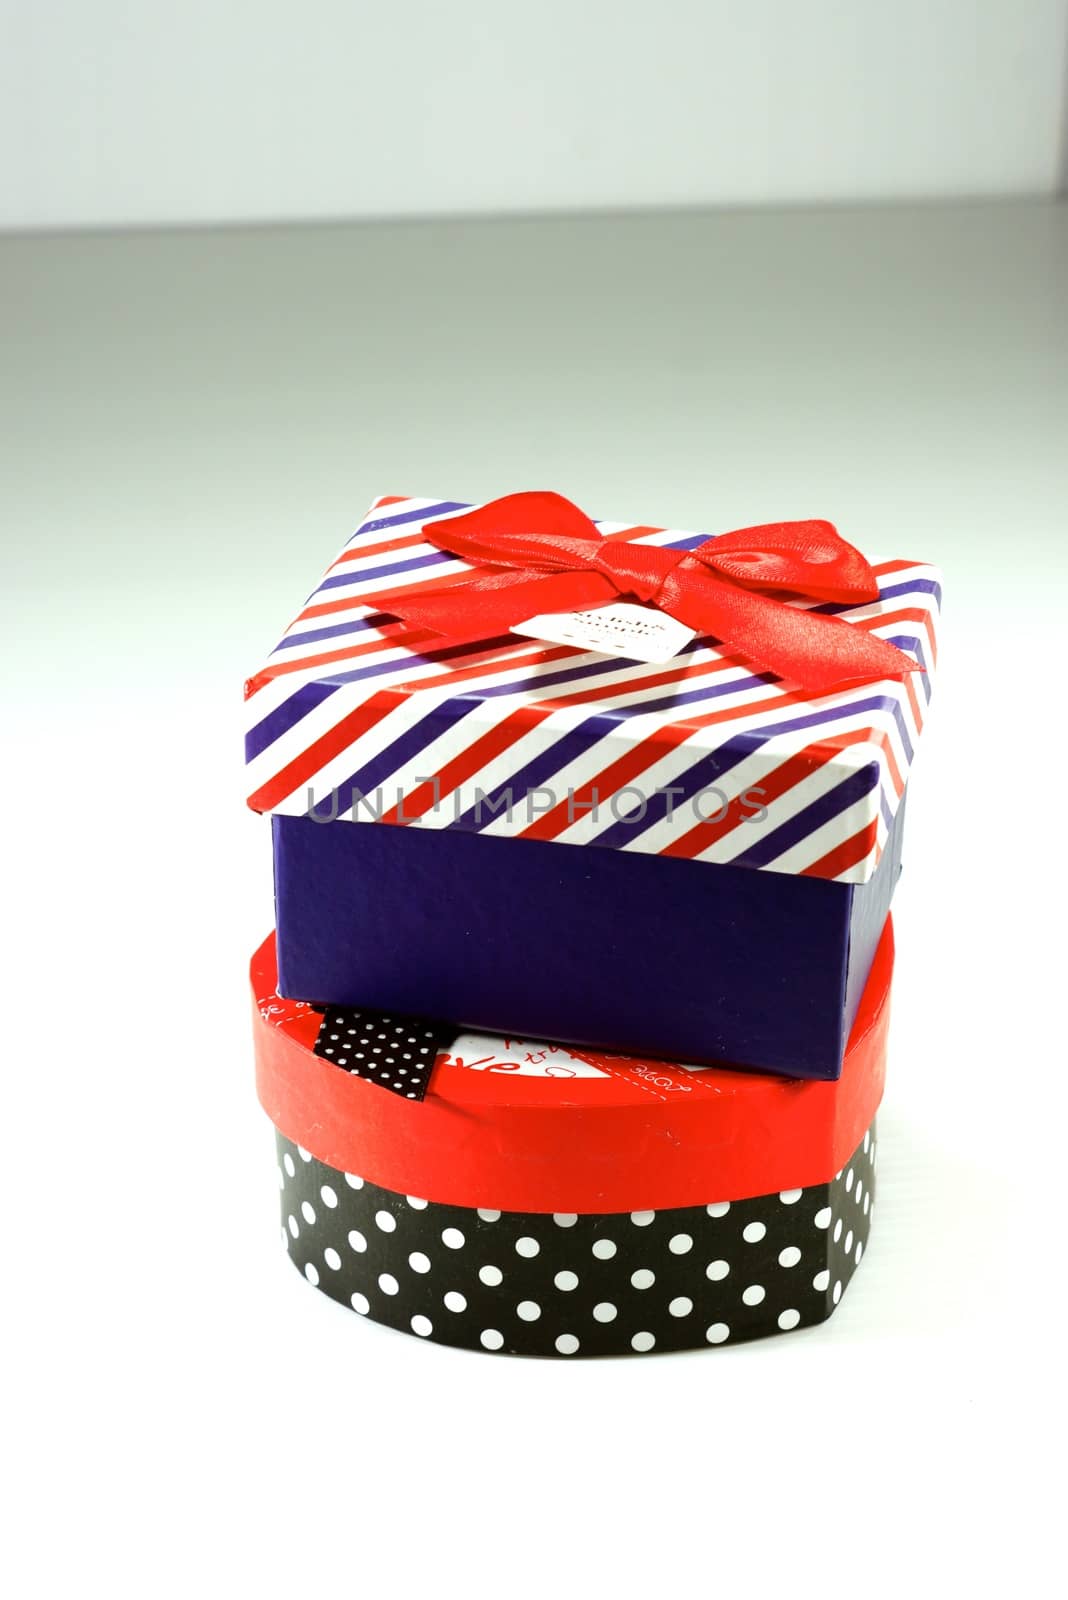 colorful gift box on white scene,shallow focus